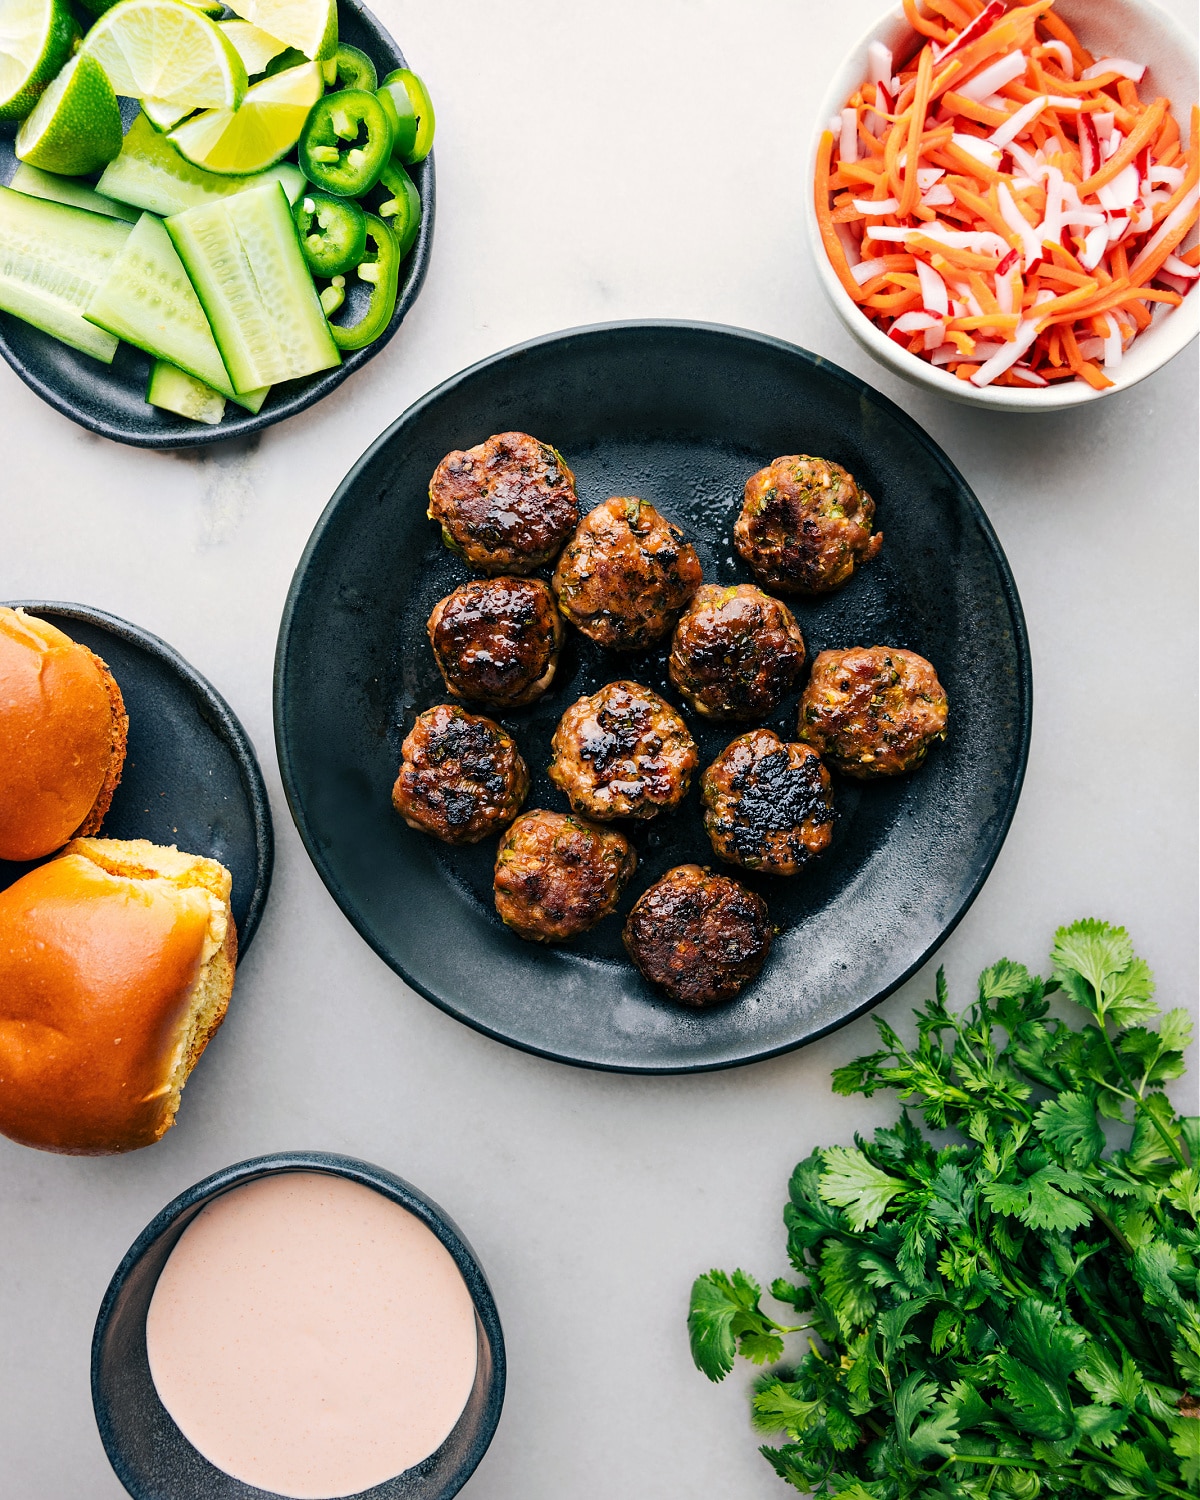 Perfectly baked pork banh mi meatballs presented amid an array of fresh ingredients, poised for slider assembly.